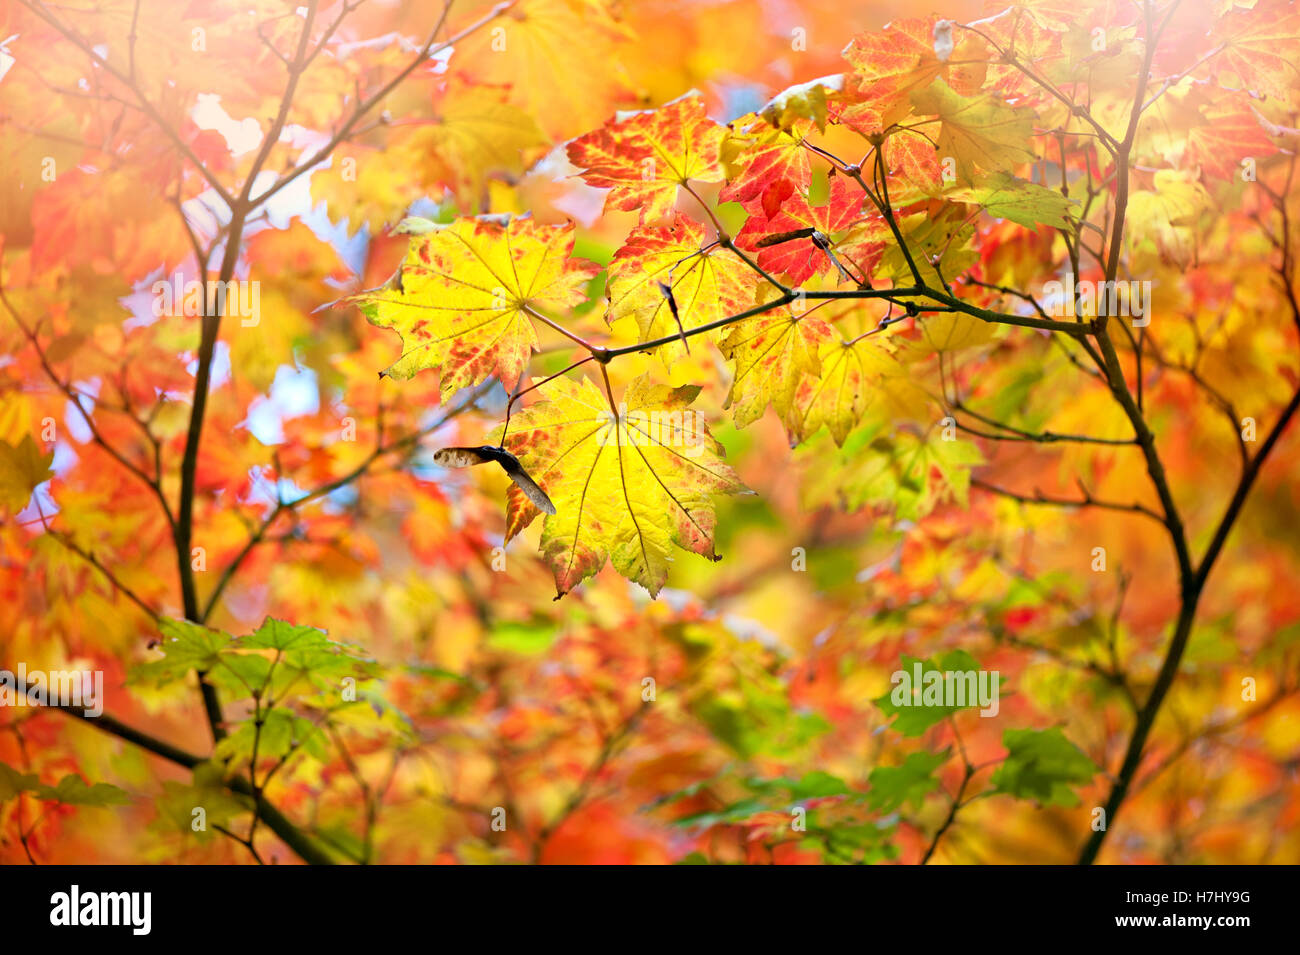 Autumn Colored Yellow Leaves Stock Photo